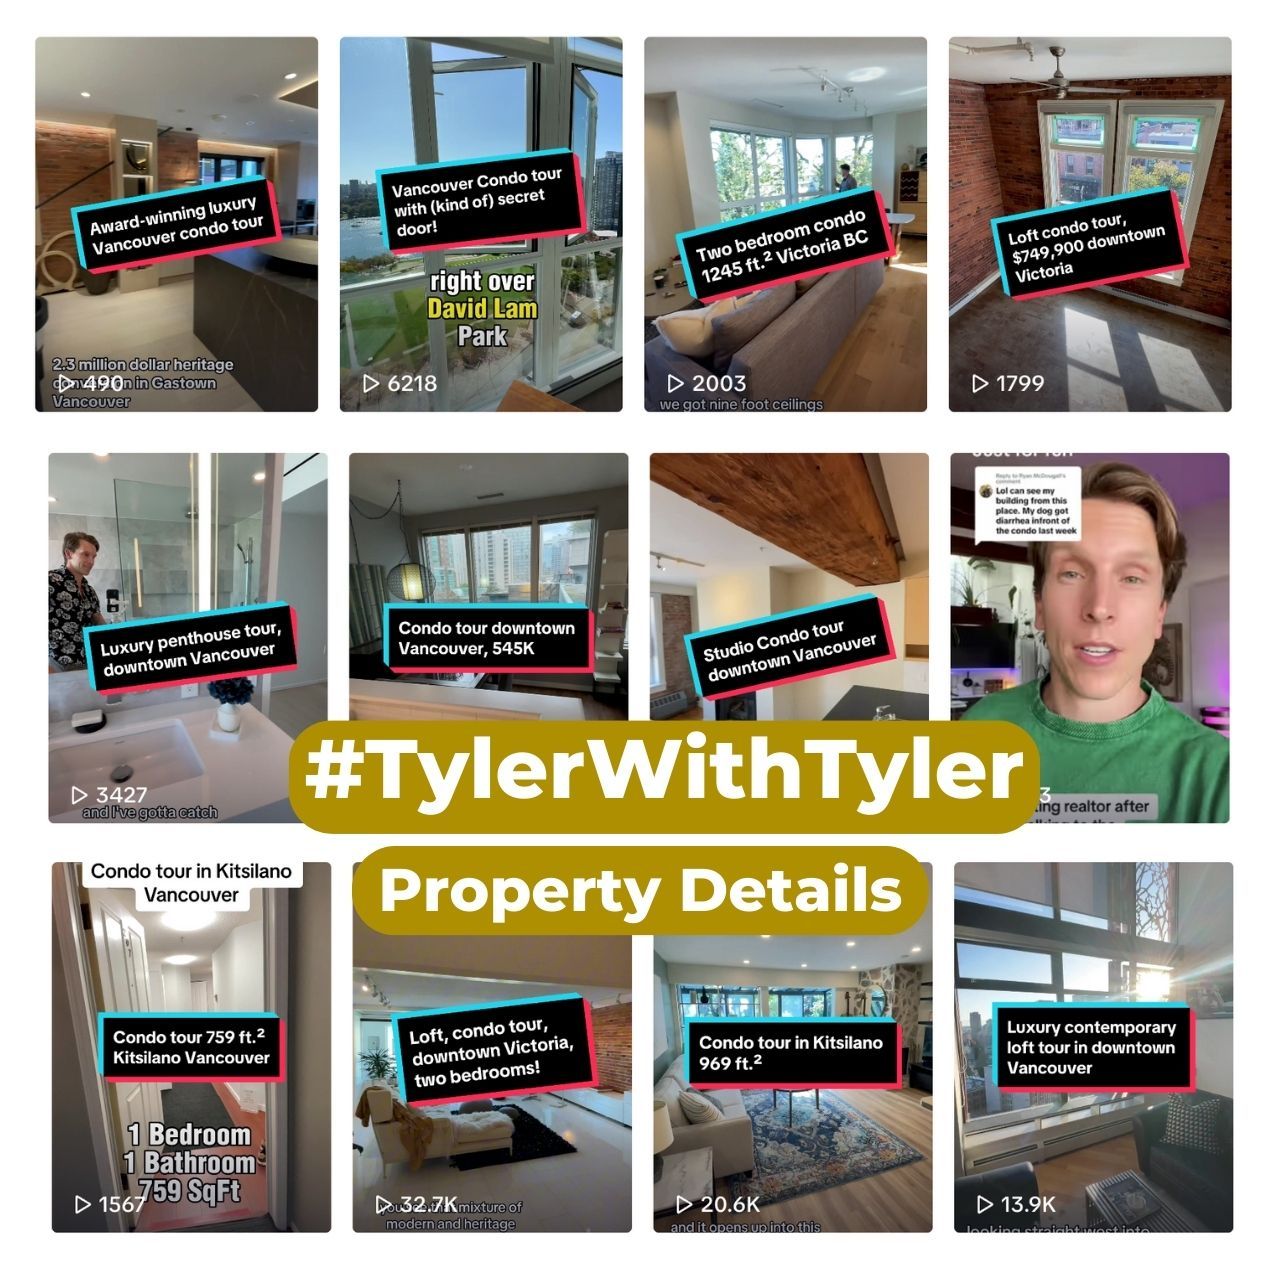 Property details for #TouringWithTyler Videos